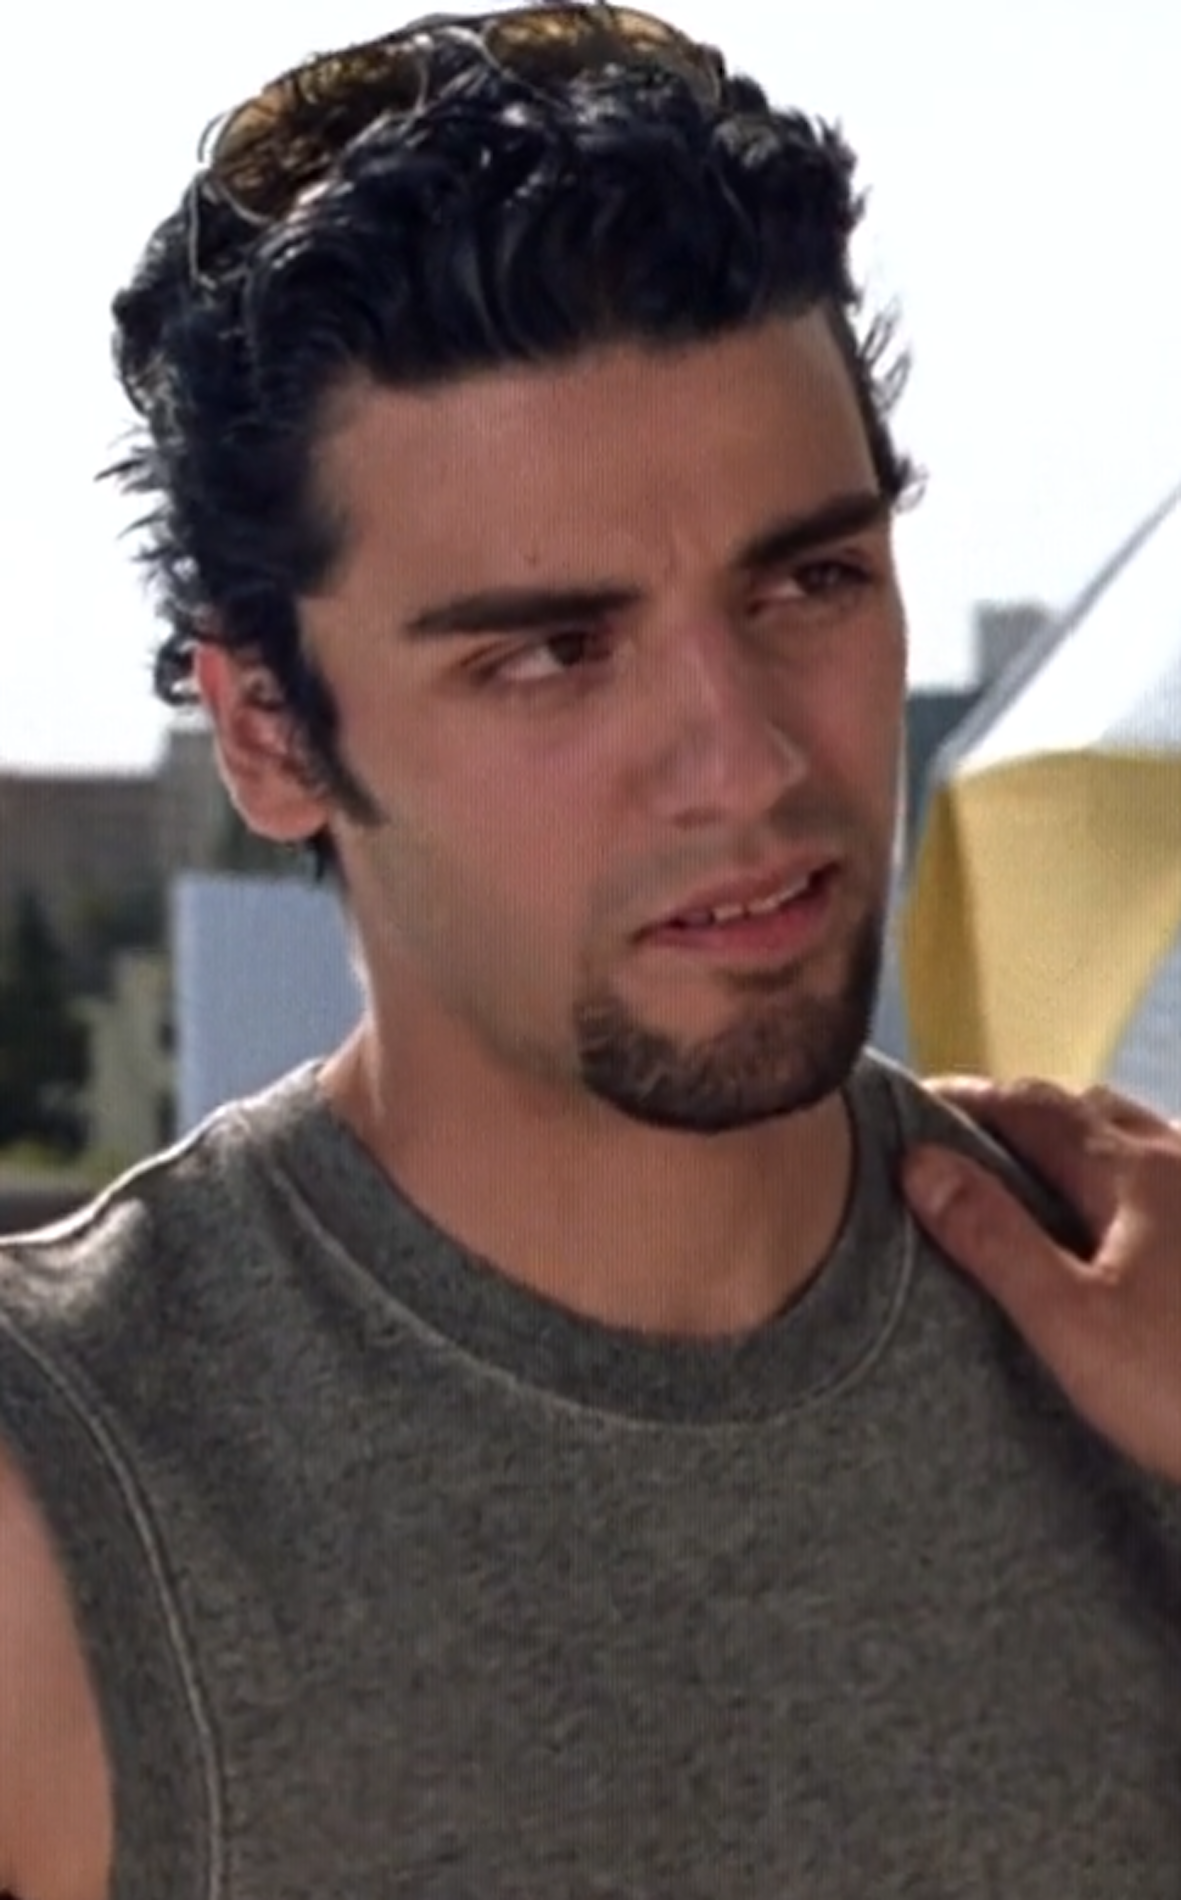 Oscar Isaac with a goatee beard, wearing a tank top and sunglasses on top of his head